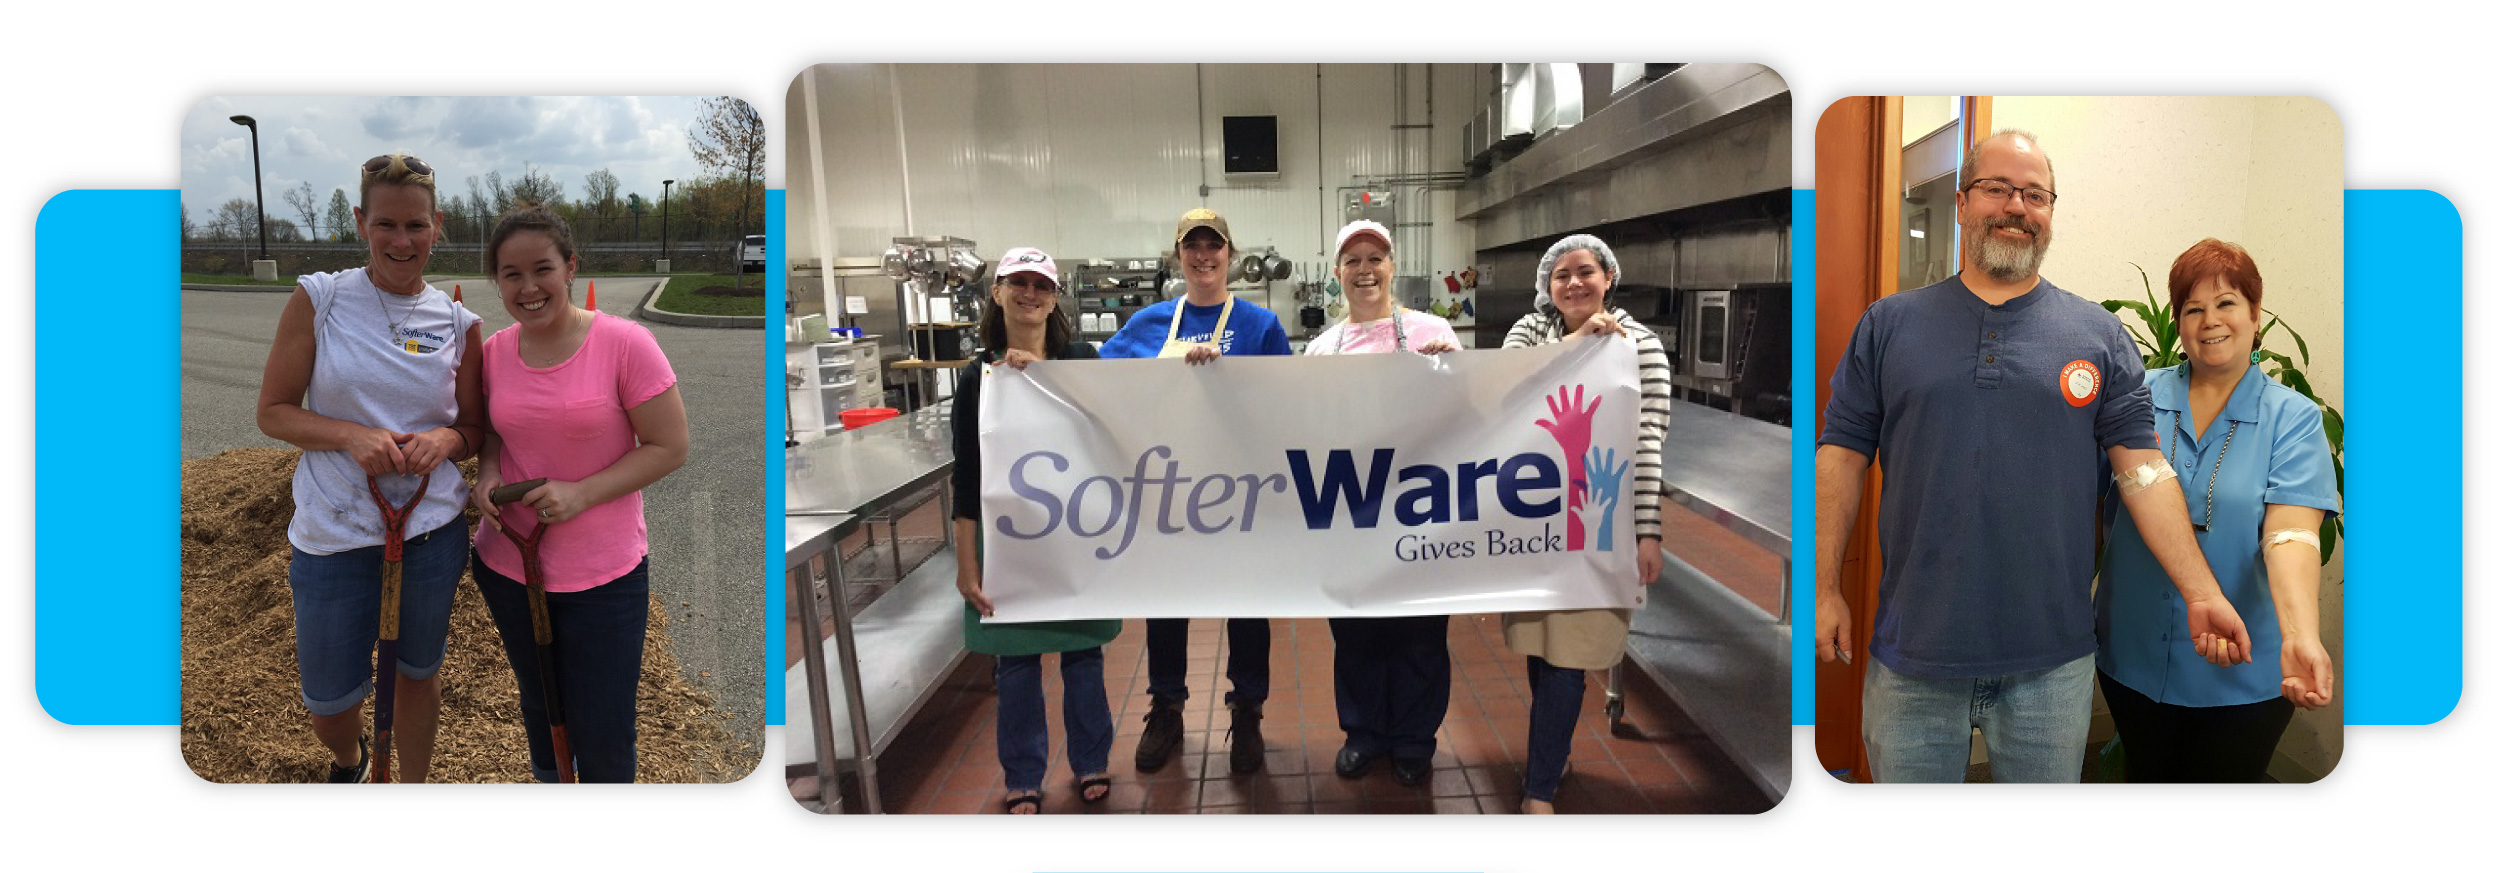 Several images of Softerware employees participating in GivesBack.